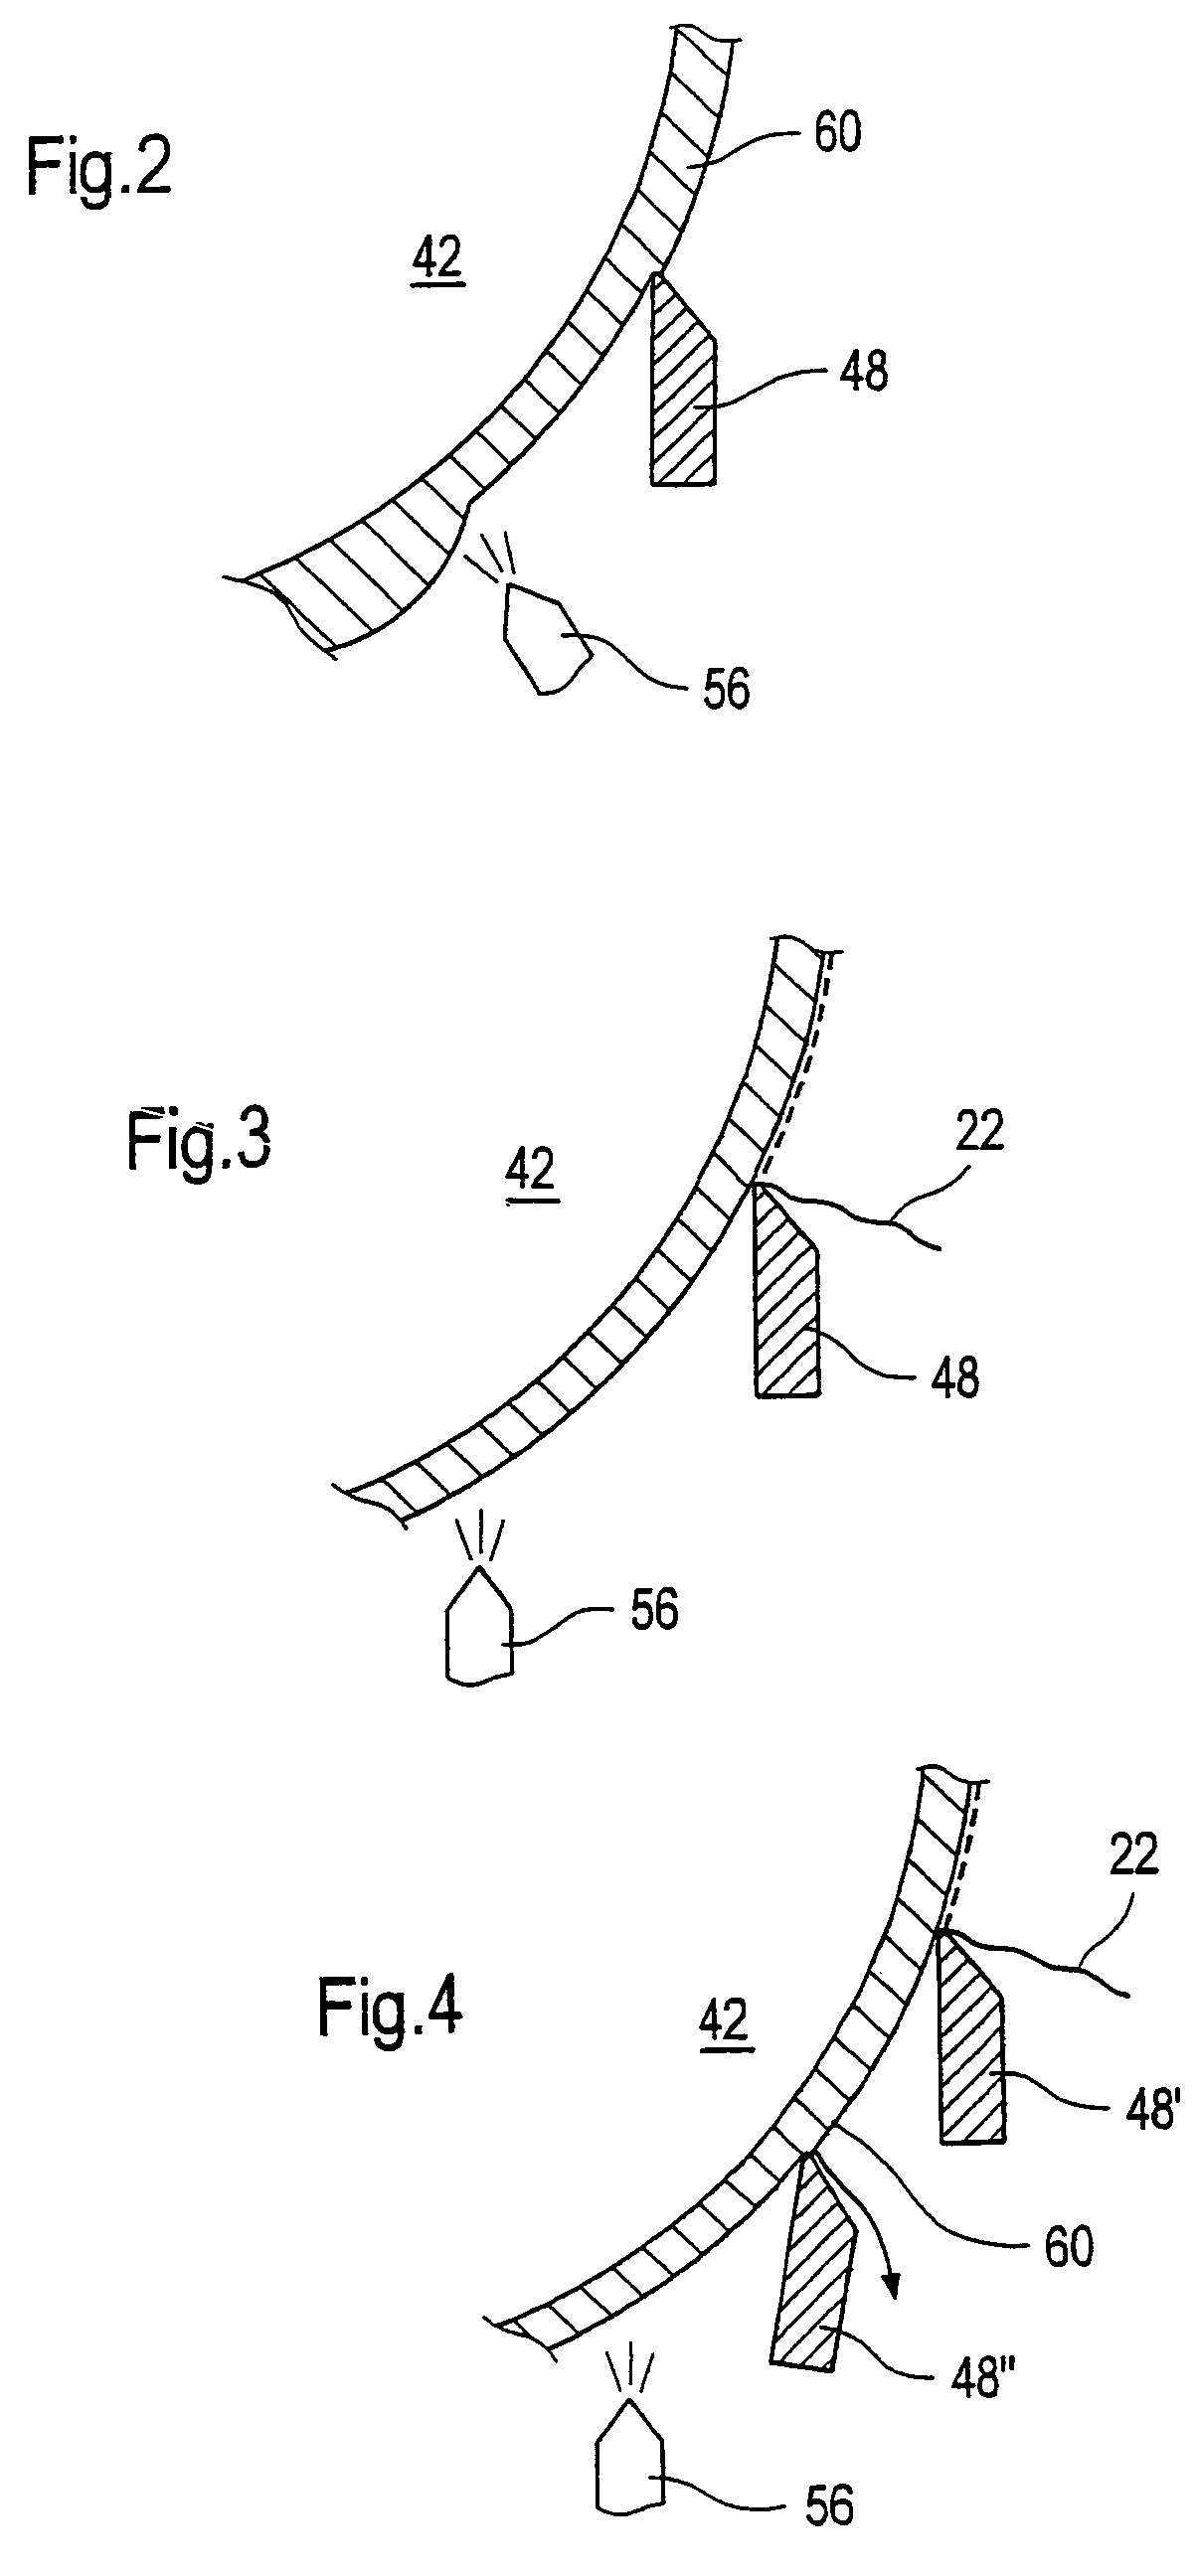 Process and apparatus for producing a tissue web